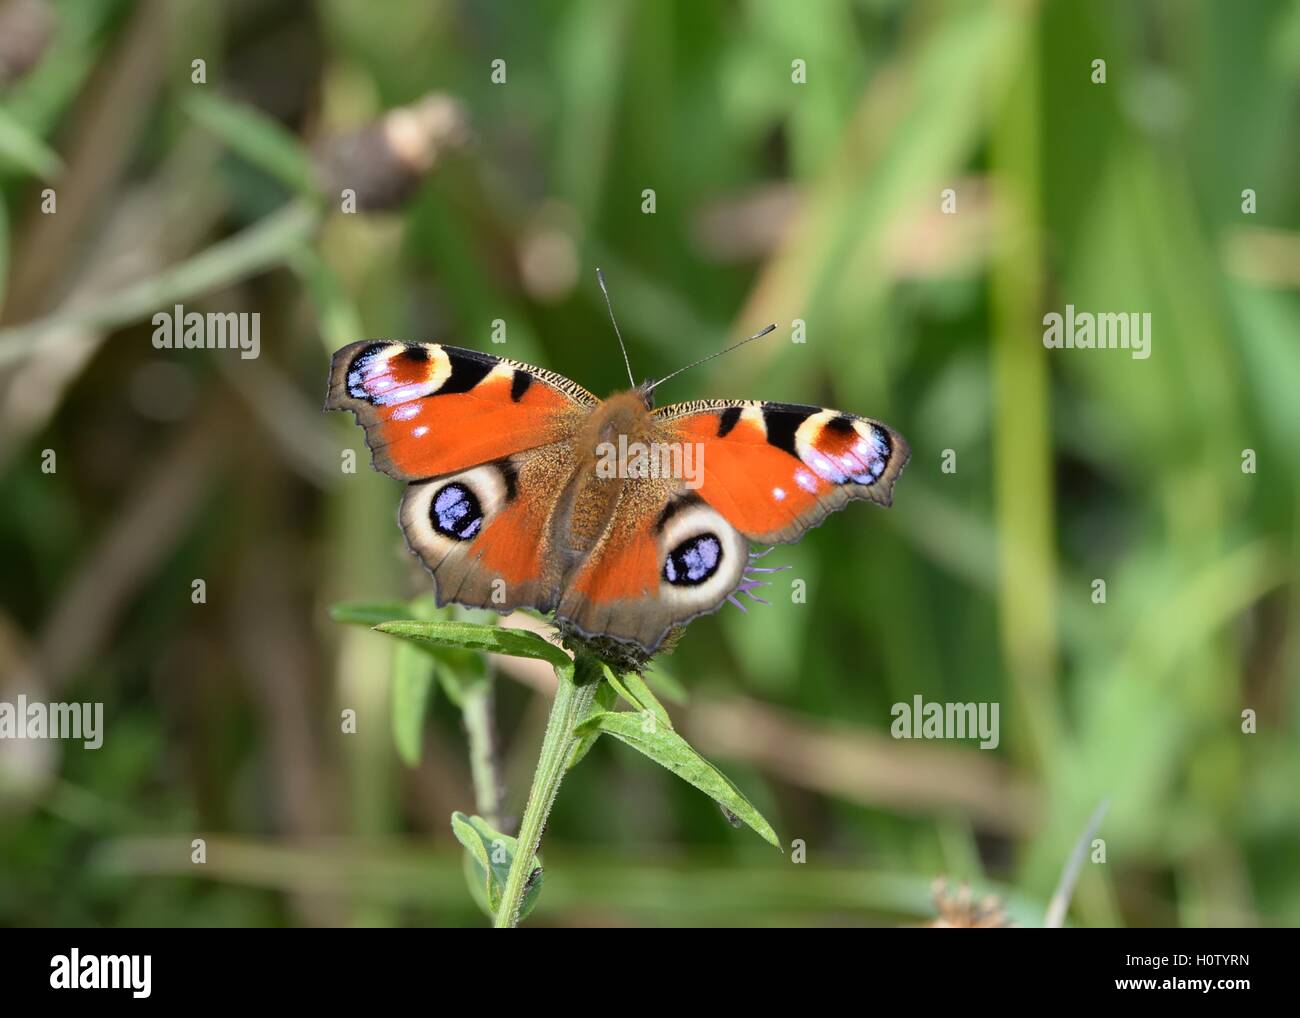 A peacock butterfly in the UK Stock Photo